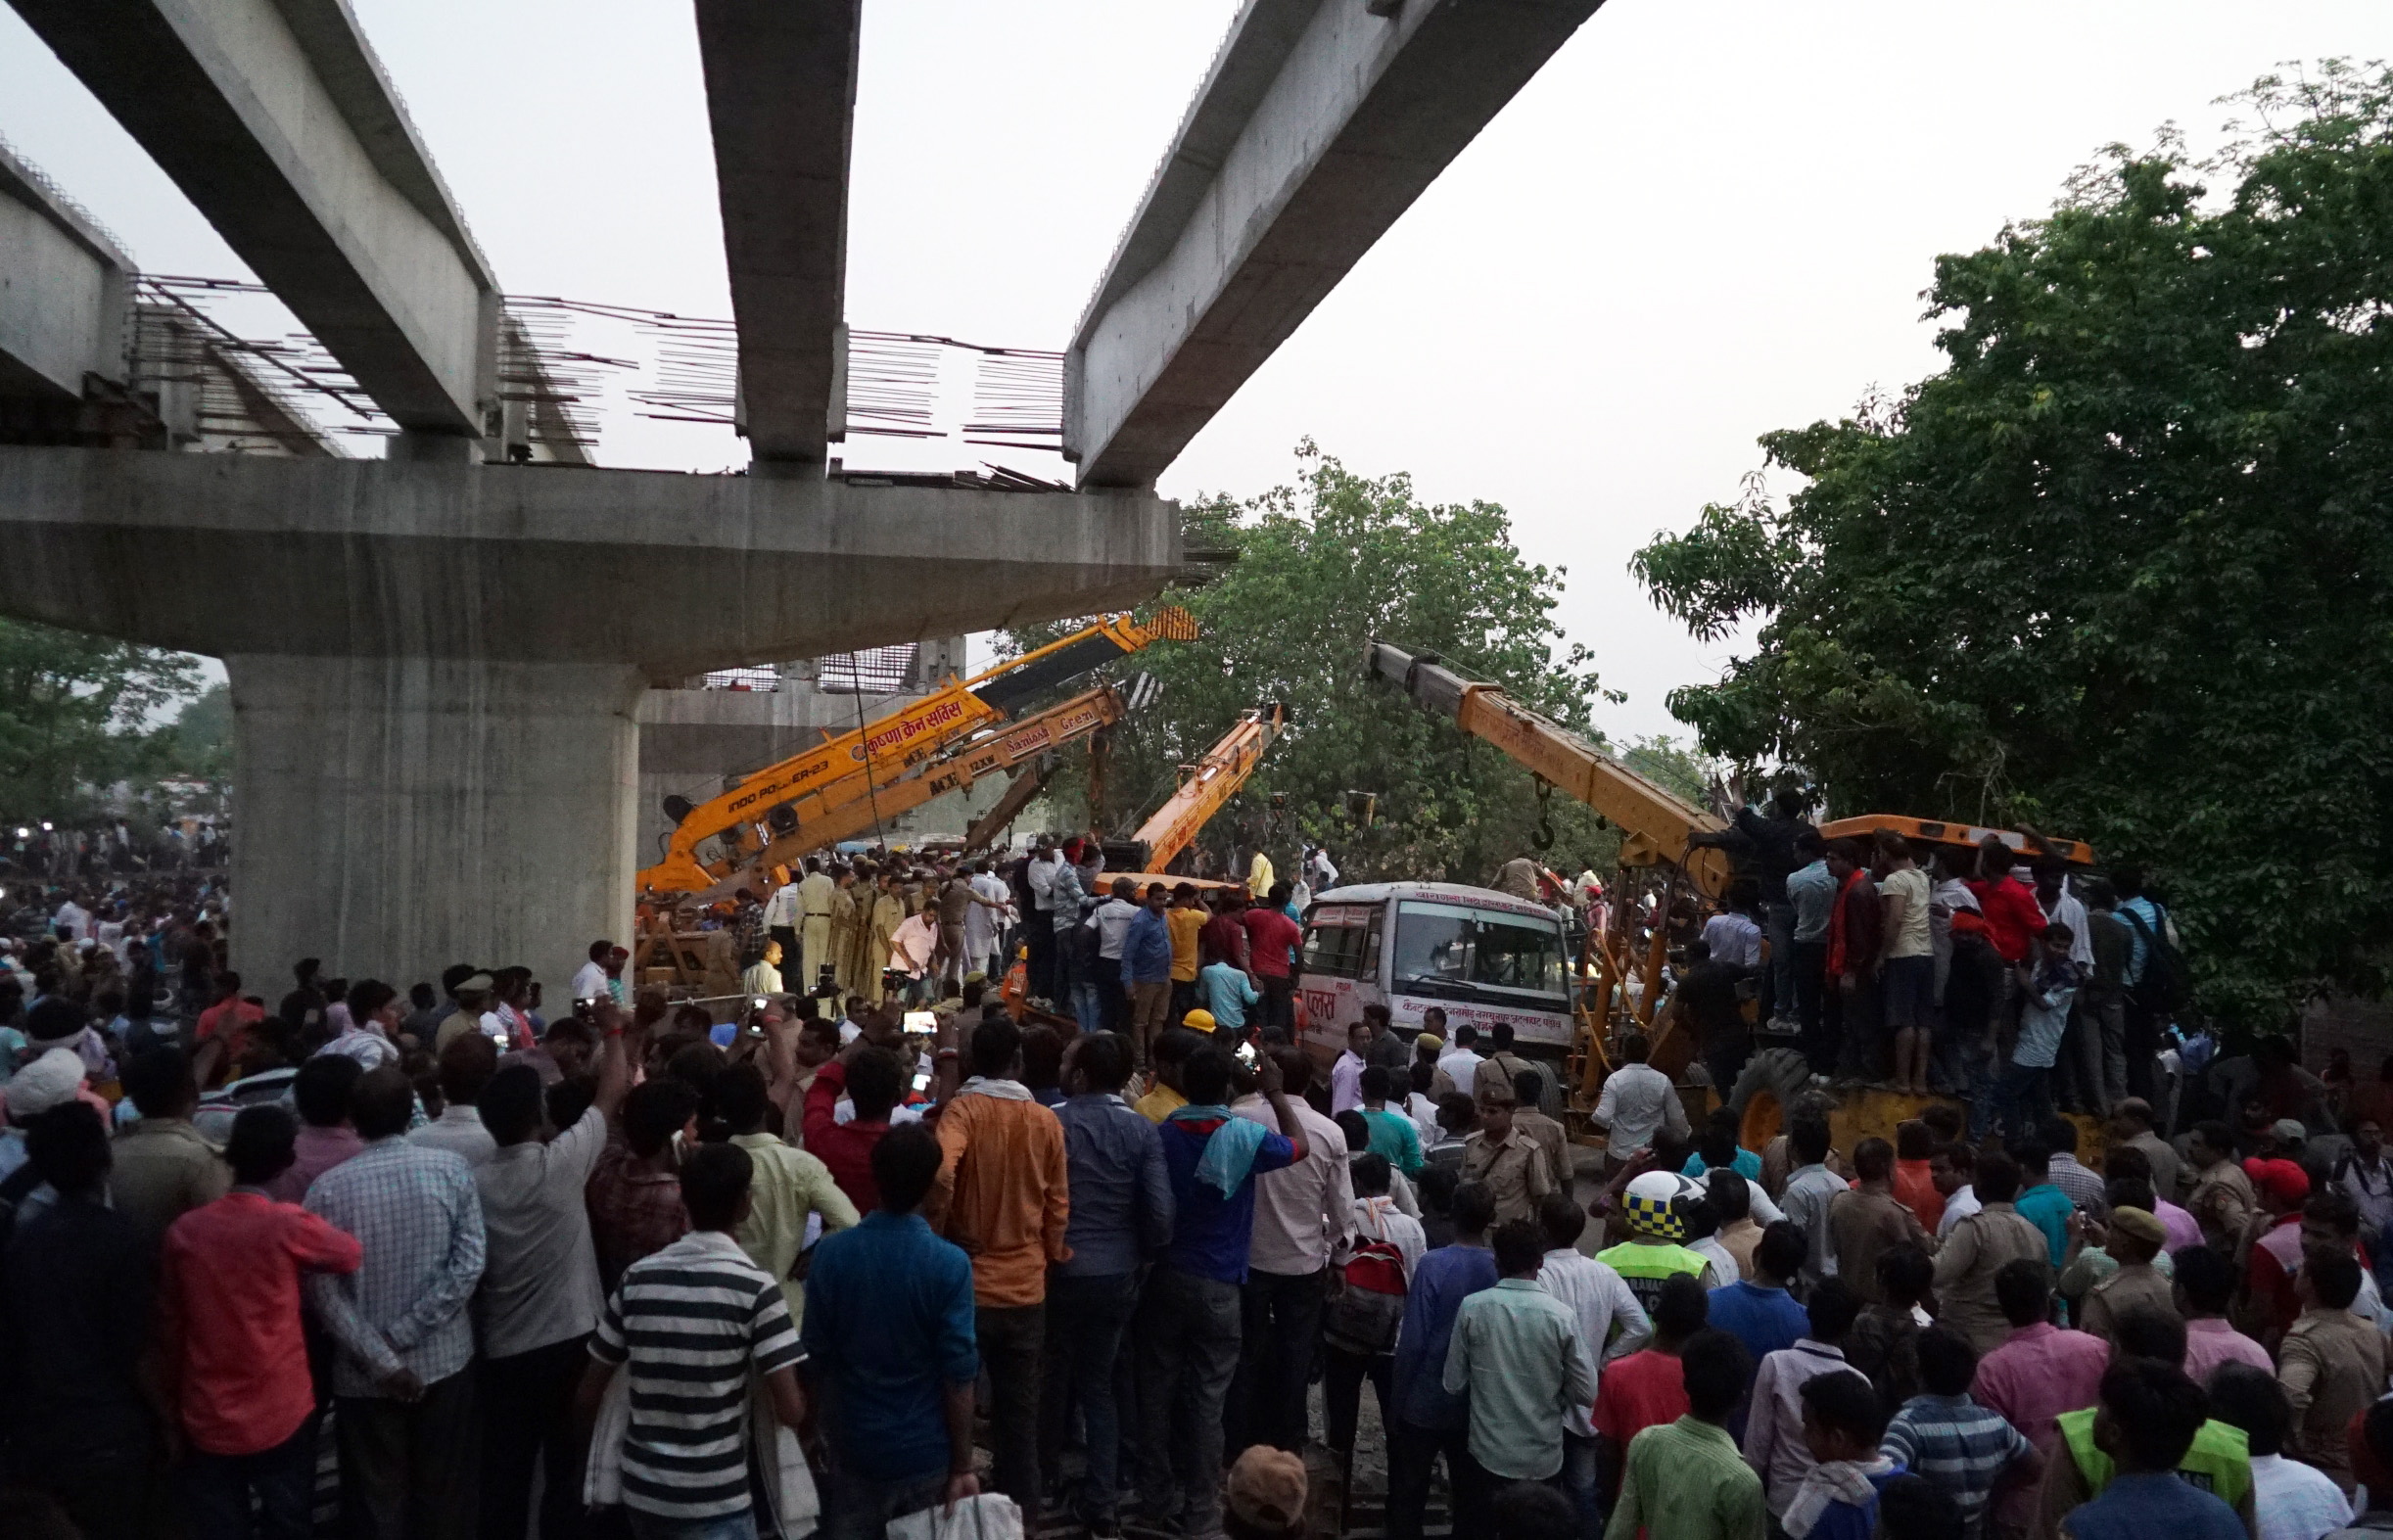 epa06739079 People gather as workers are engaged in rescue work at the spot where a portion of an under construction bridge collapsed in Varanasi, India, 15 May 2018. At least 12 people are killed and many others are still trapped after the bridge collapsed near a railway station.  EPA/PRABHAT KUMAR VERMA